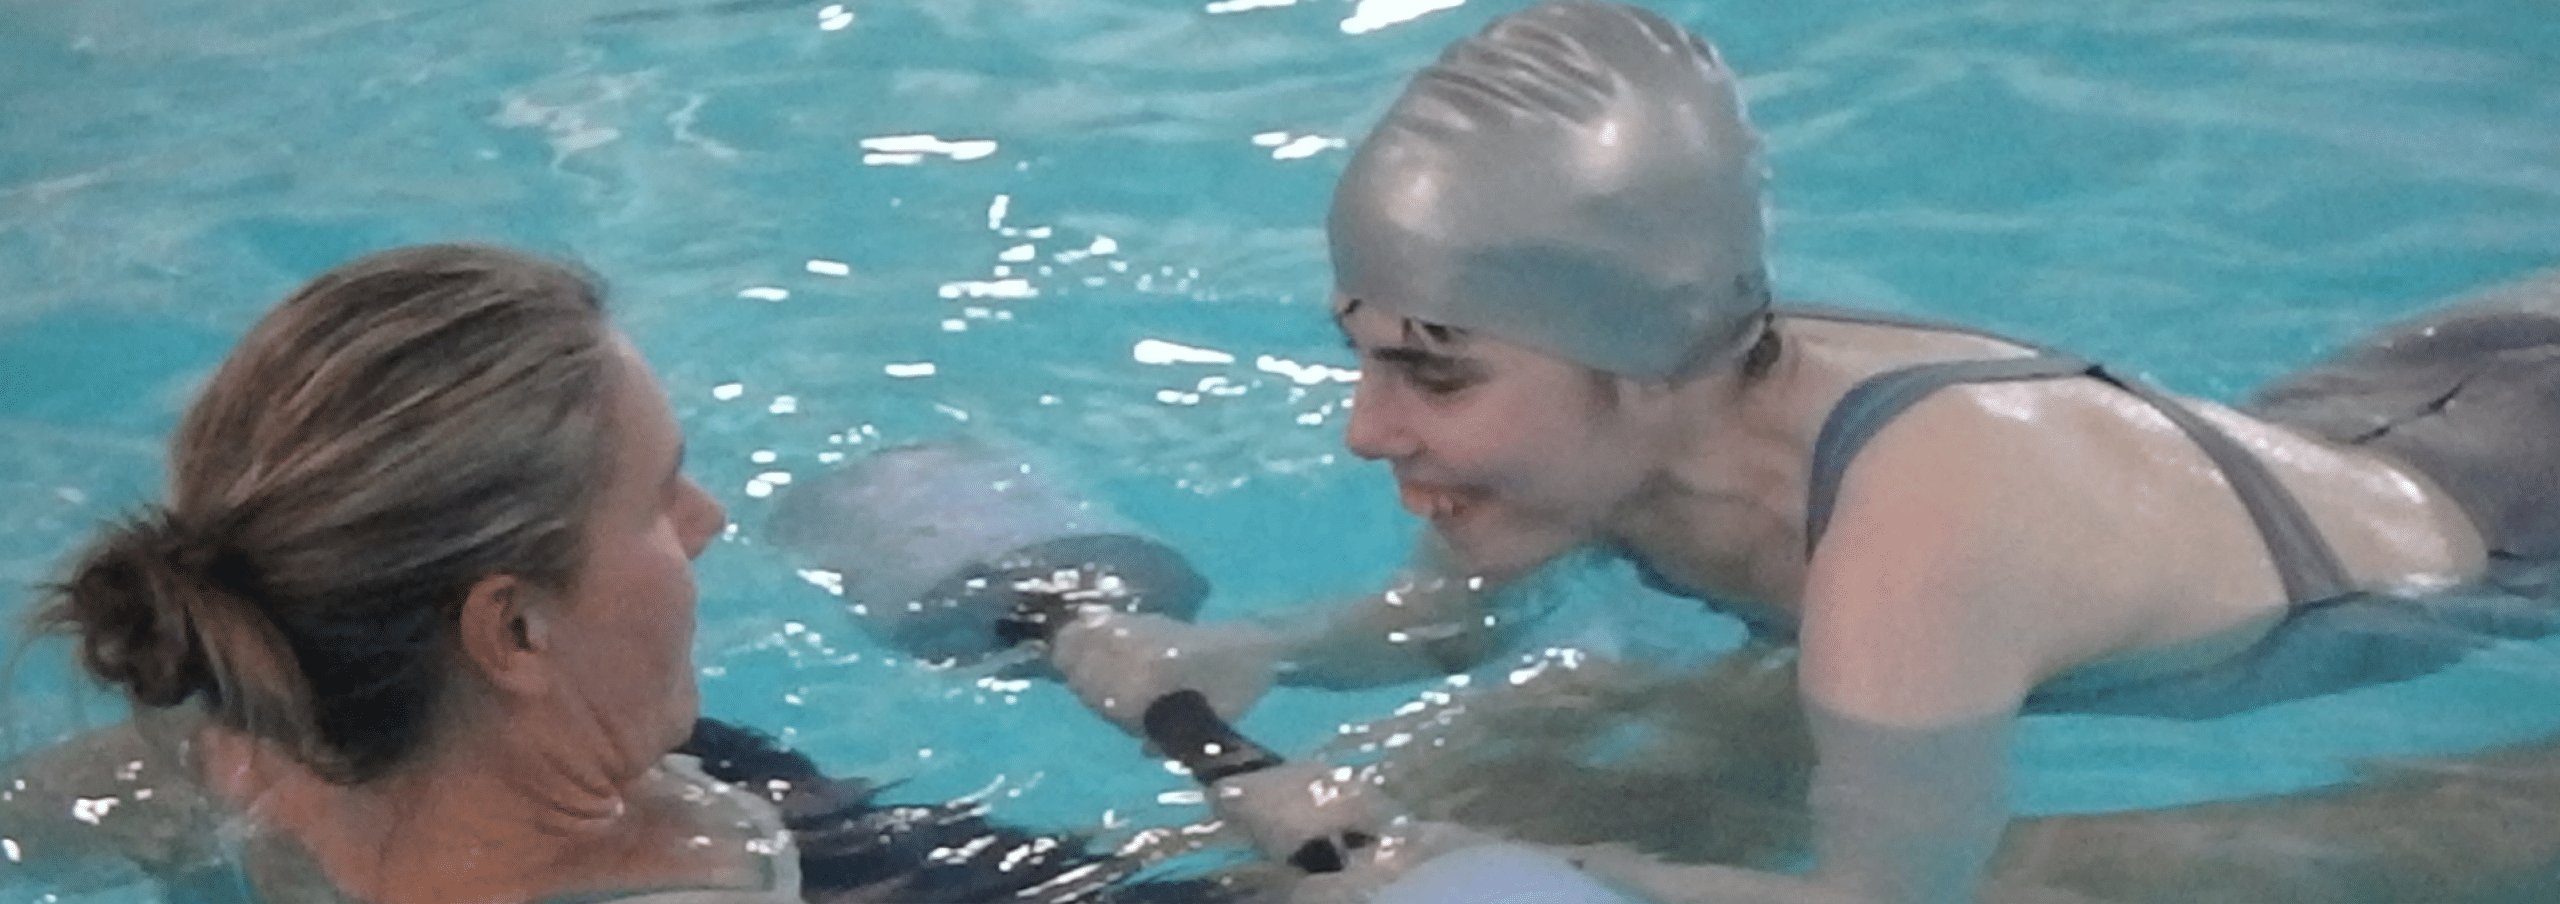 Aquatic Therapy Instructor with Swimmer